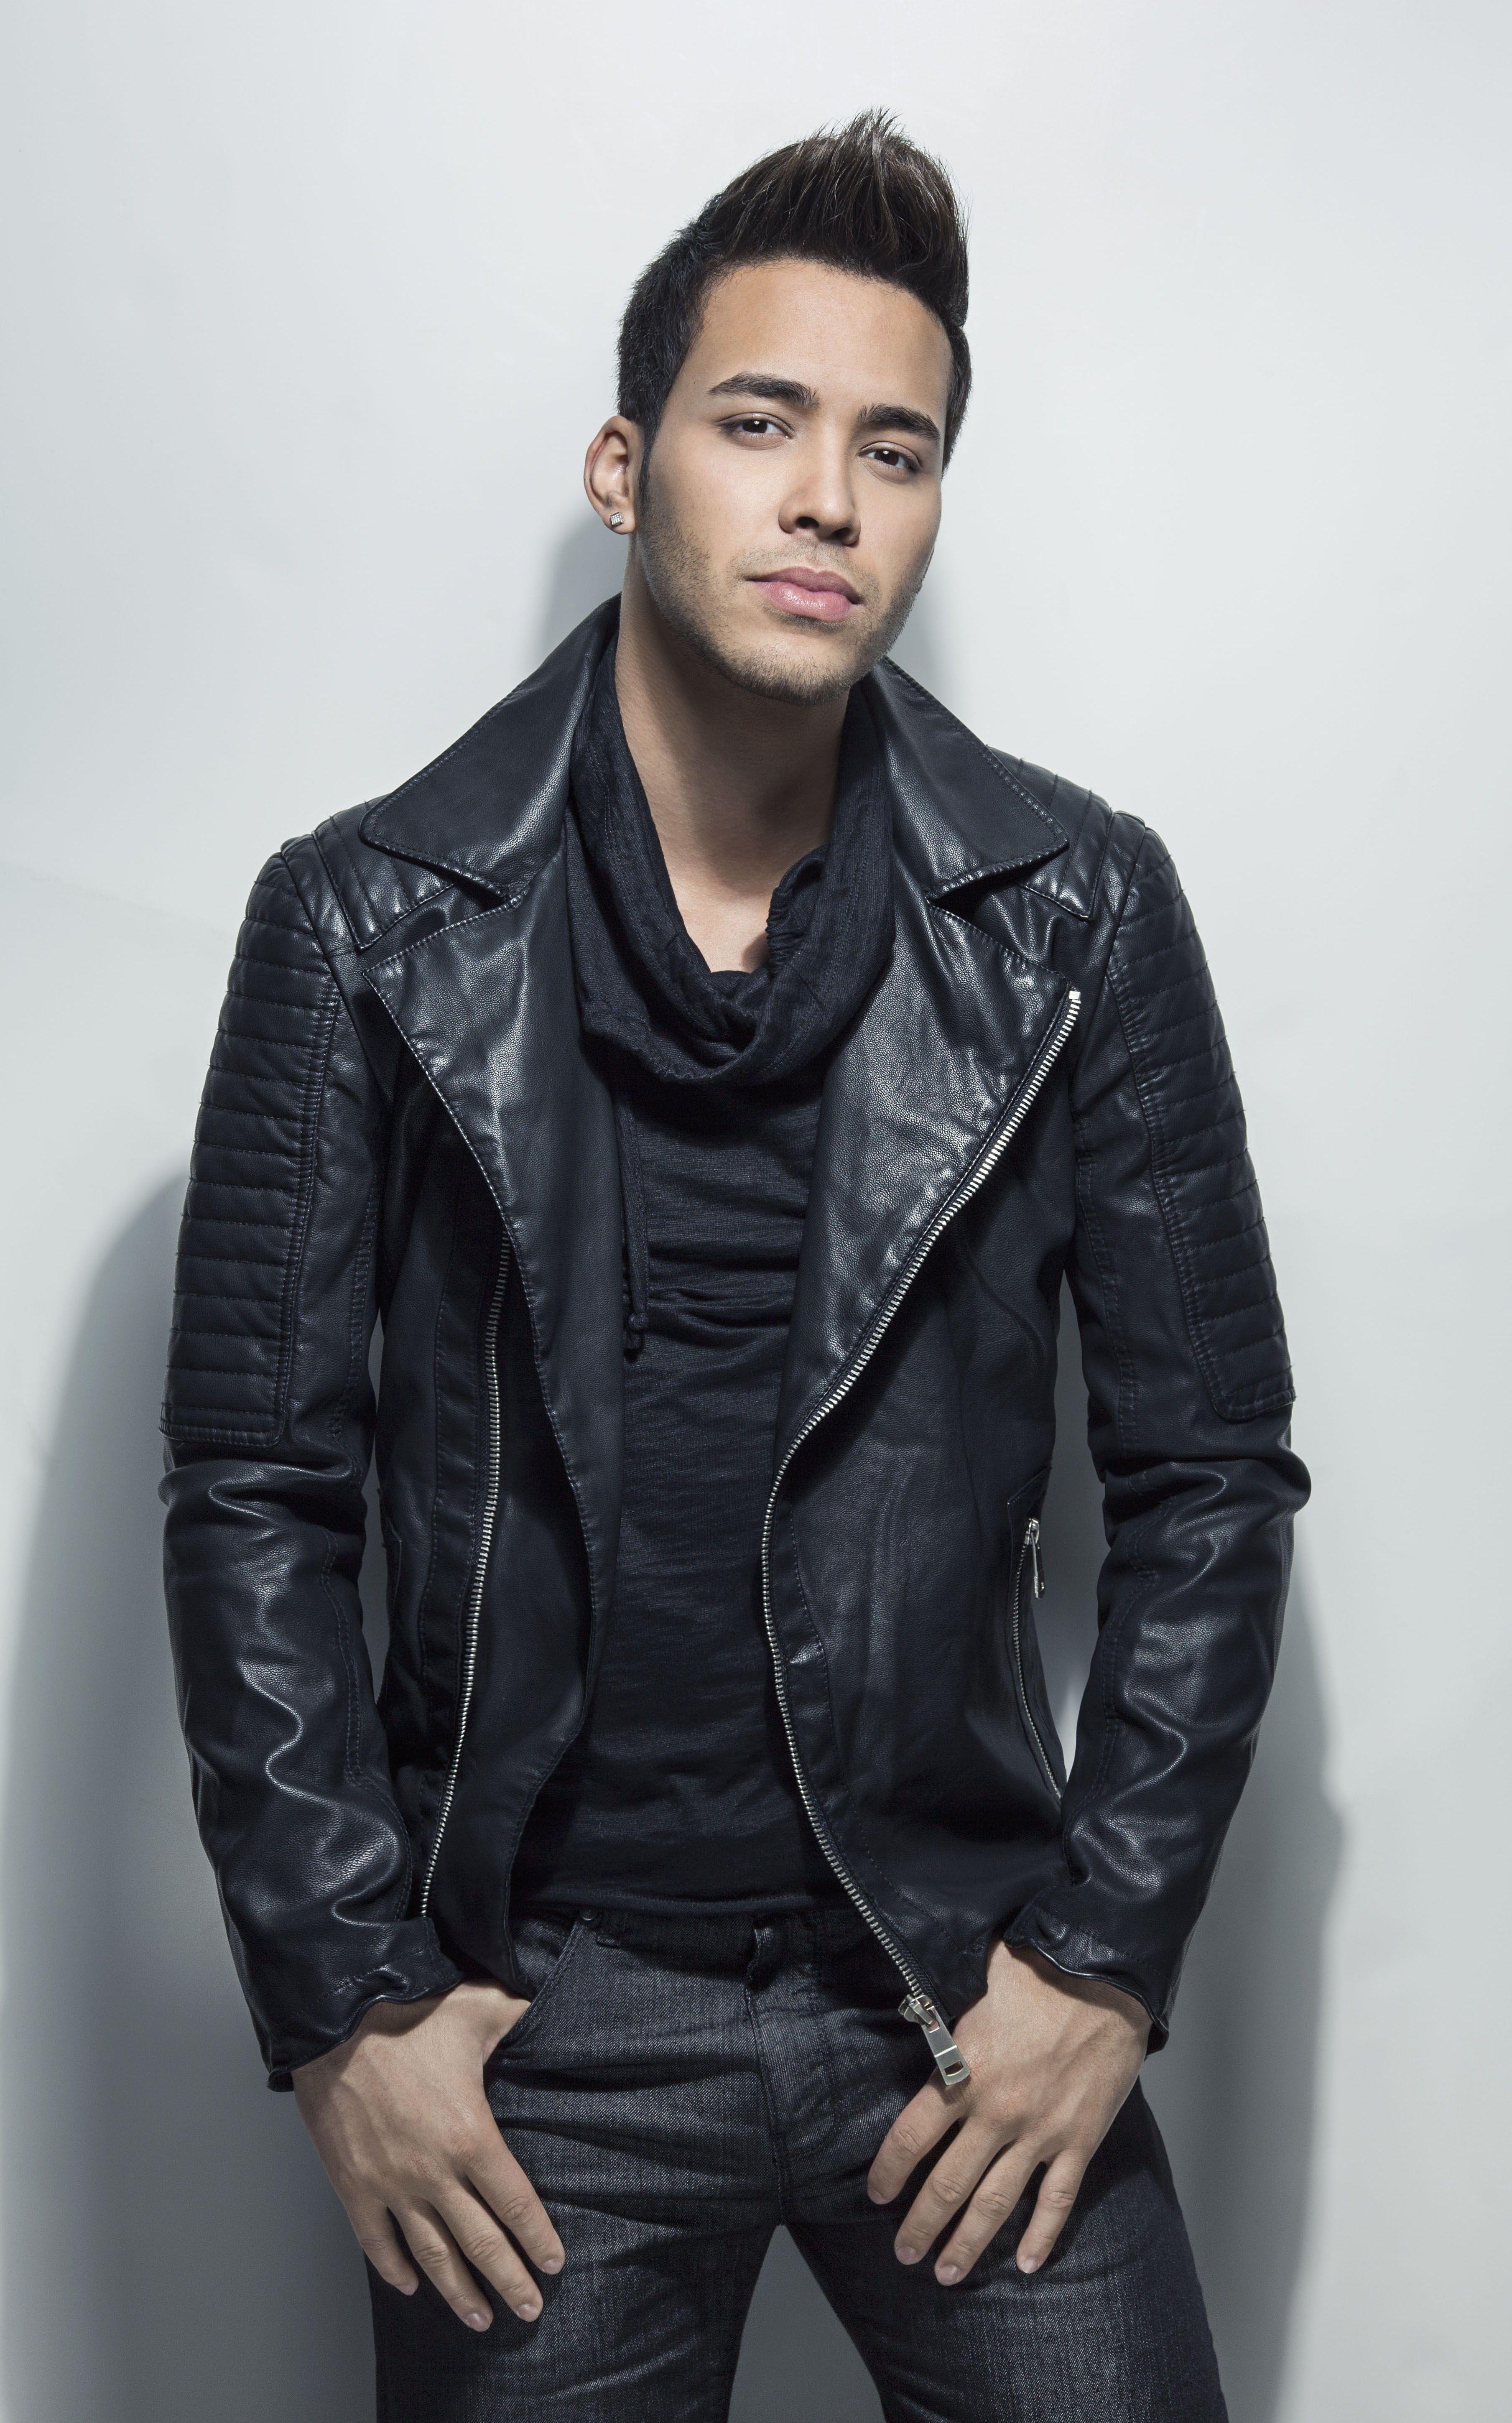 Prince Royce Wallpapers - Top Free Prince Royce Backgrounds ...